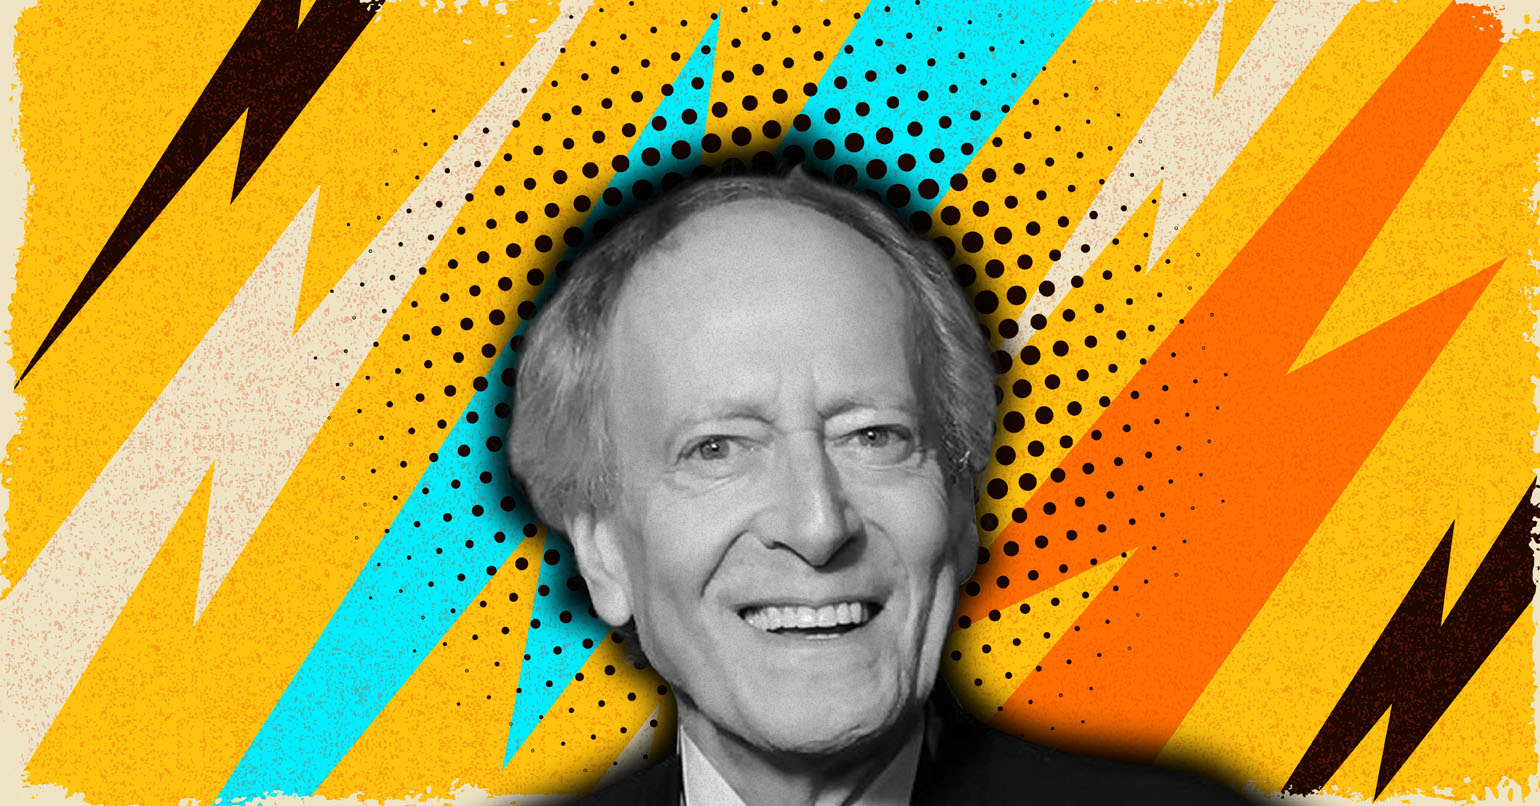 John Barry The music icon who made bond movies memorable.